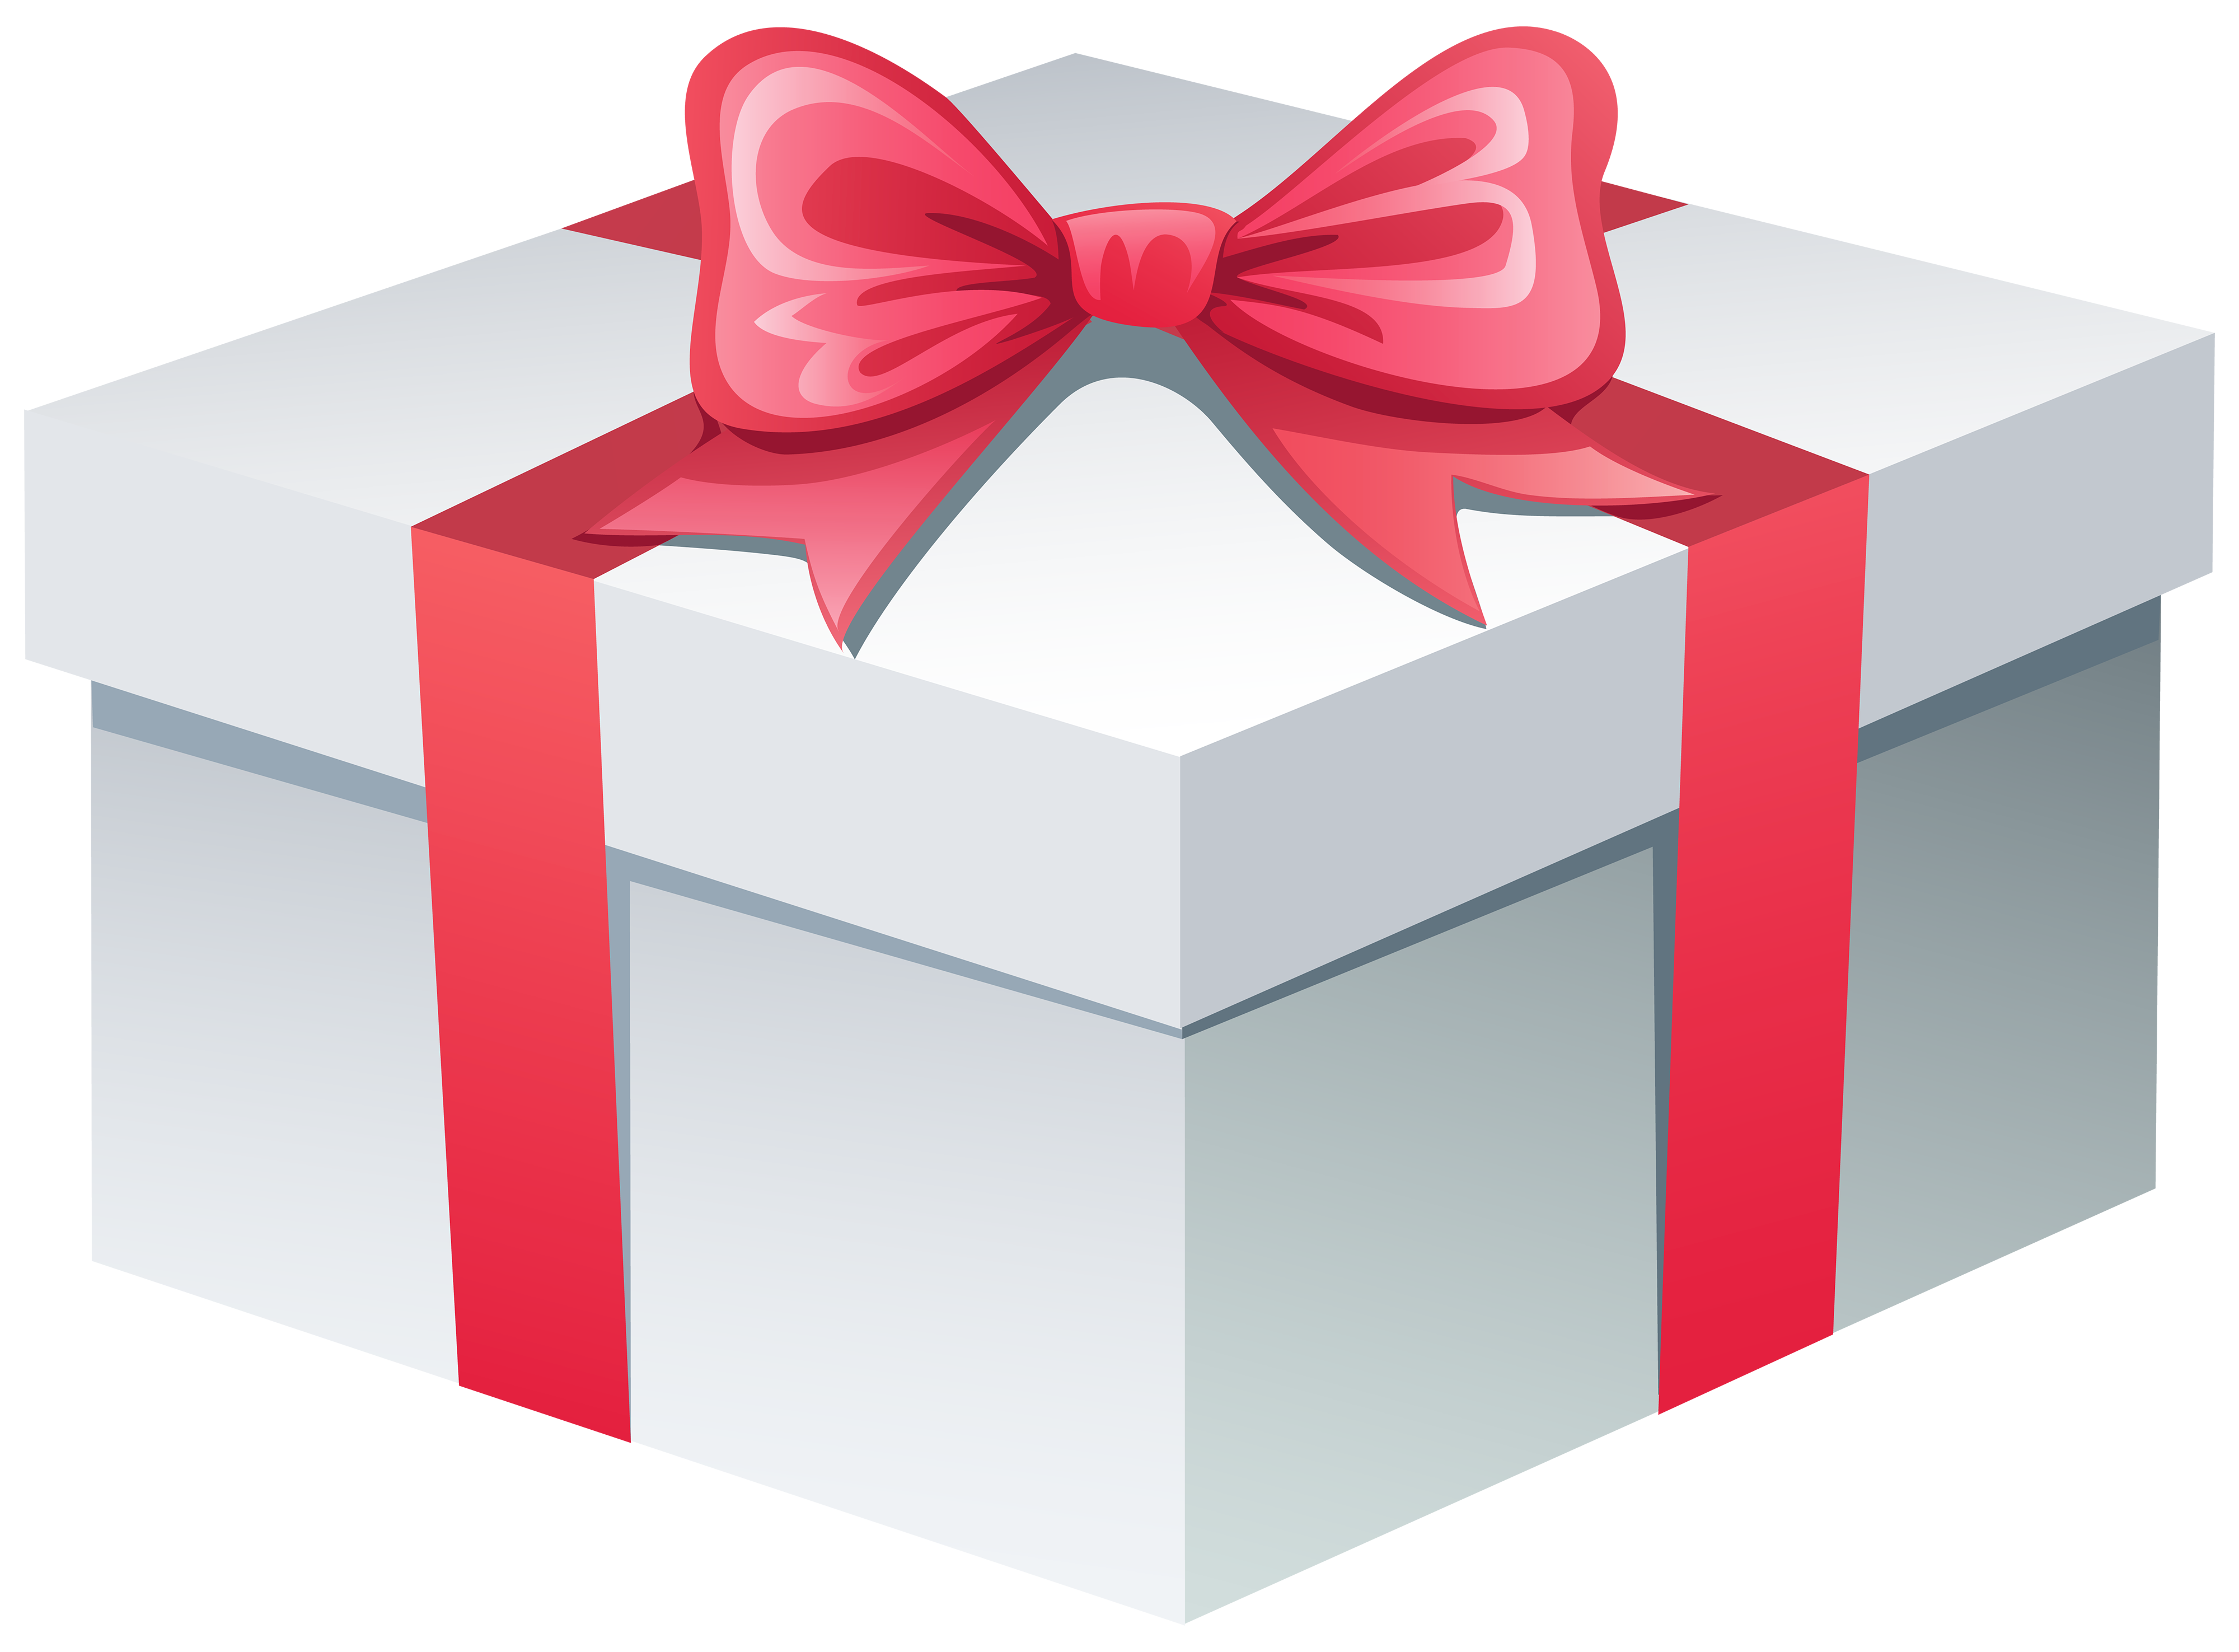 Free Gift Box Png, Download Free Clip Art, Free Clip Art on